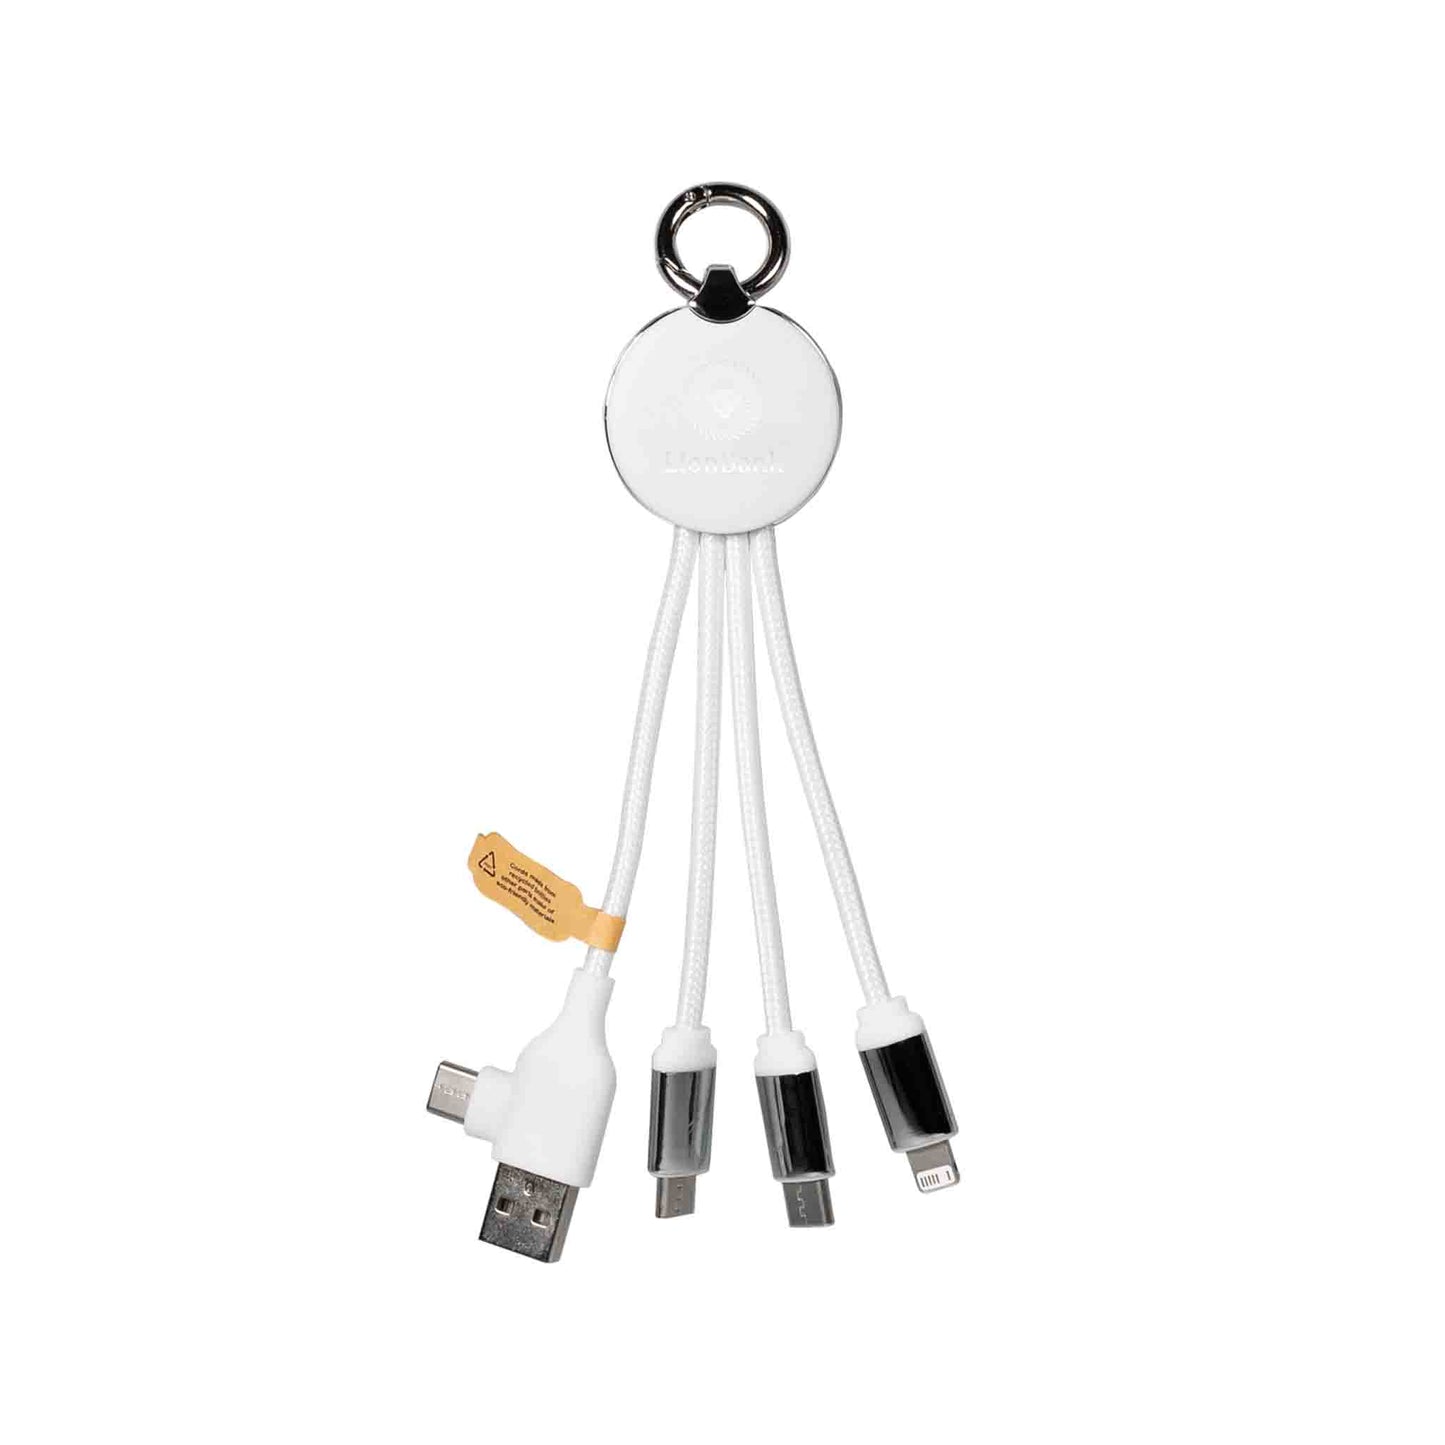 MagCable 5in1 LED "short" USB cable